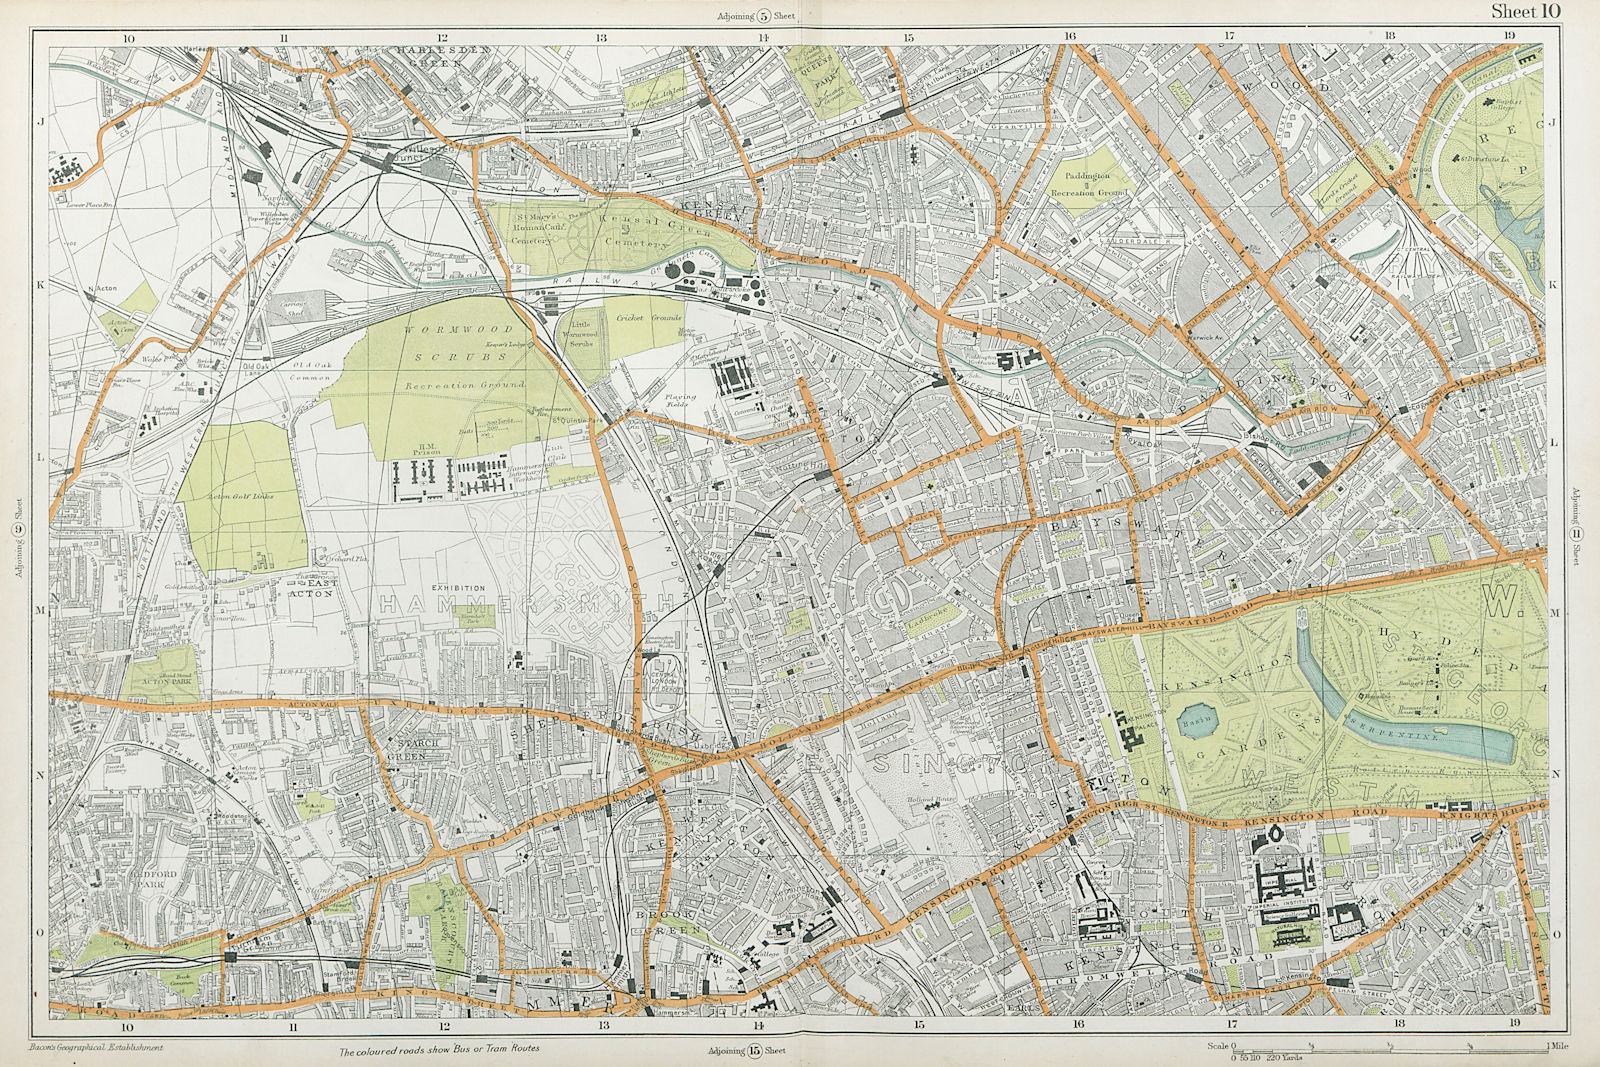 Associate Product LONDON Notting Hill Kensington St Johns Wd Hammersmith Bayswater BACON  1920 map